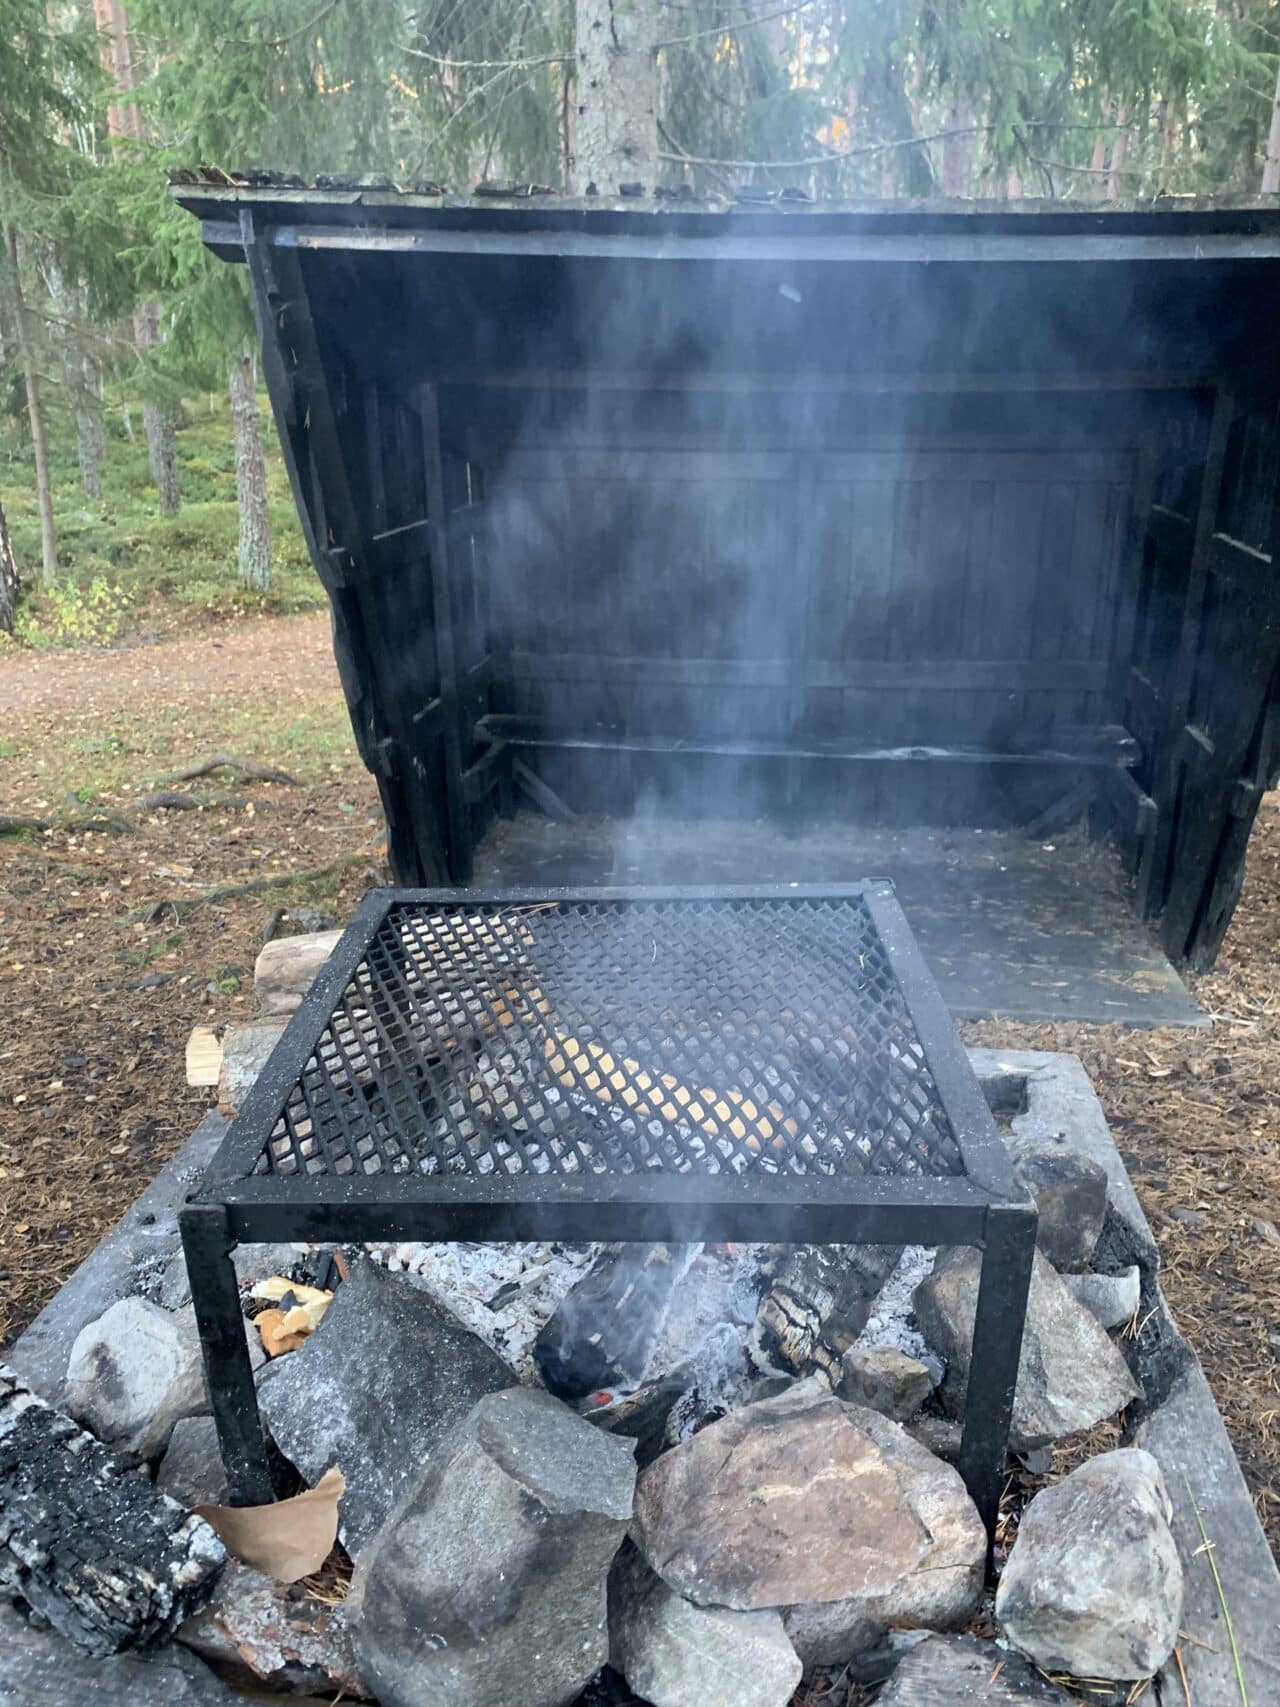 Smoking Firepit With Barbecue Grate At Wilderness Camp Site